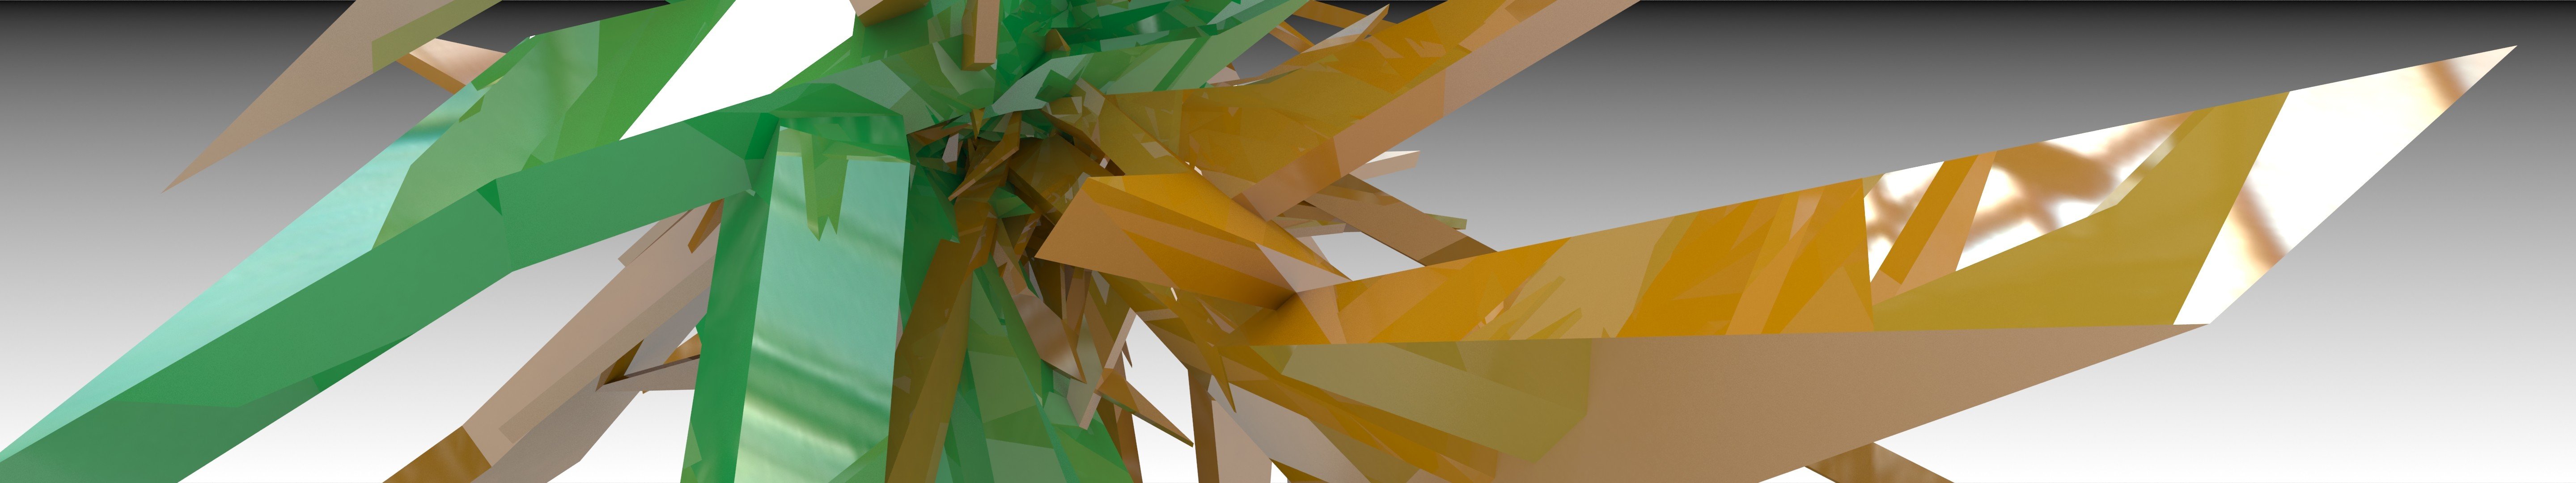 green, Abstract, Orange, Spikes, 3d, Renders, 3d, Art, 3ds, Max, Vray Wallpaper